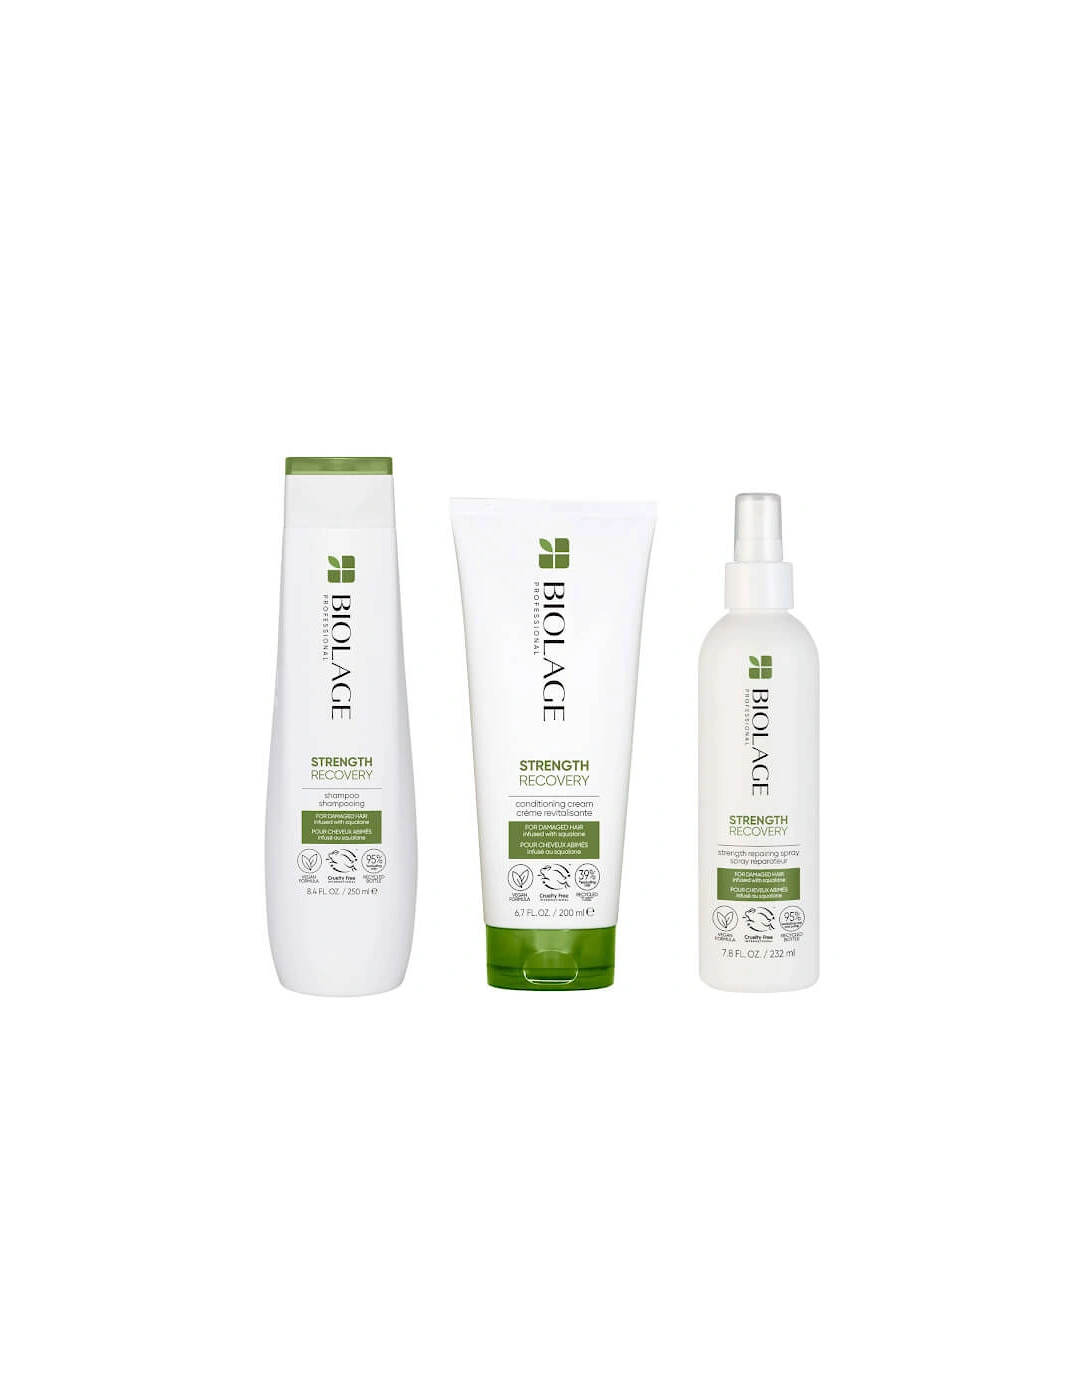 Professional Strength Recovery Vegan Cleansing Shampoo, Conditioner and Leave-in Spray Routine for Damaged Hair, 2 of 1